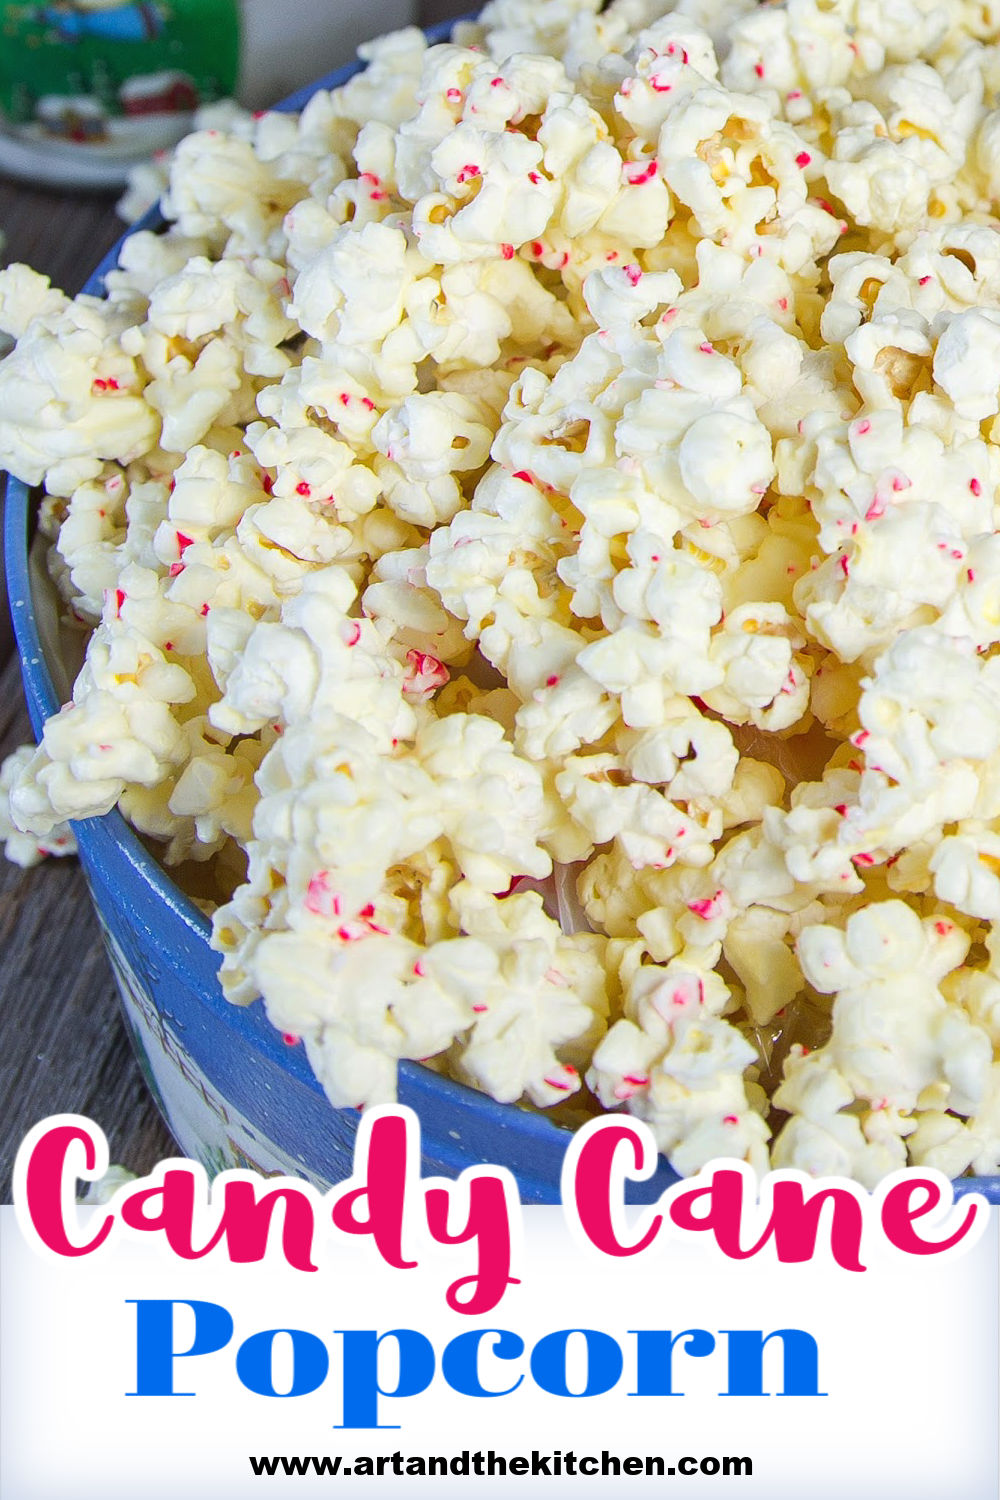 White Chocolate Candy Cane Popcorn is a must make holiday treat. It is so easy to make, popcorn coated in white chocolate and bits of candy cane. This addictive snack makes a great gourmet food gift. via @artandthekitch